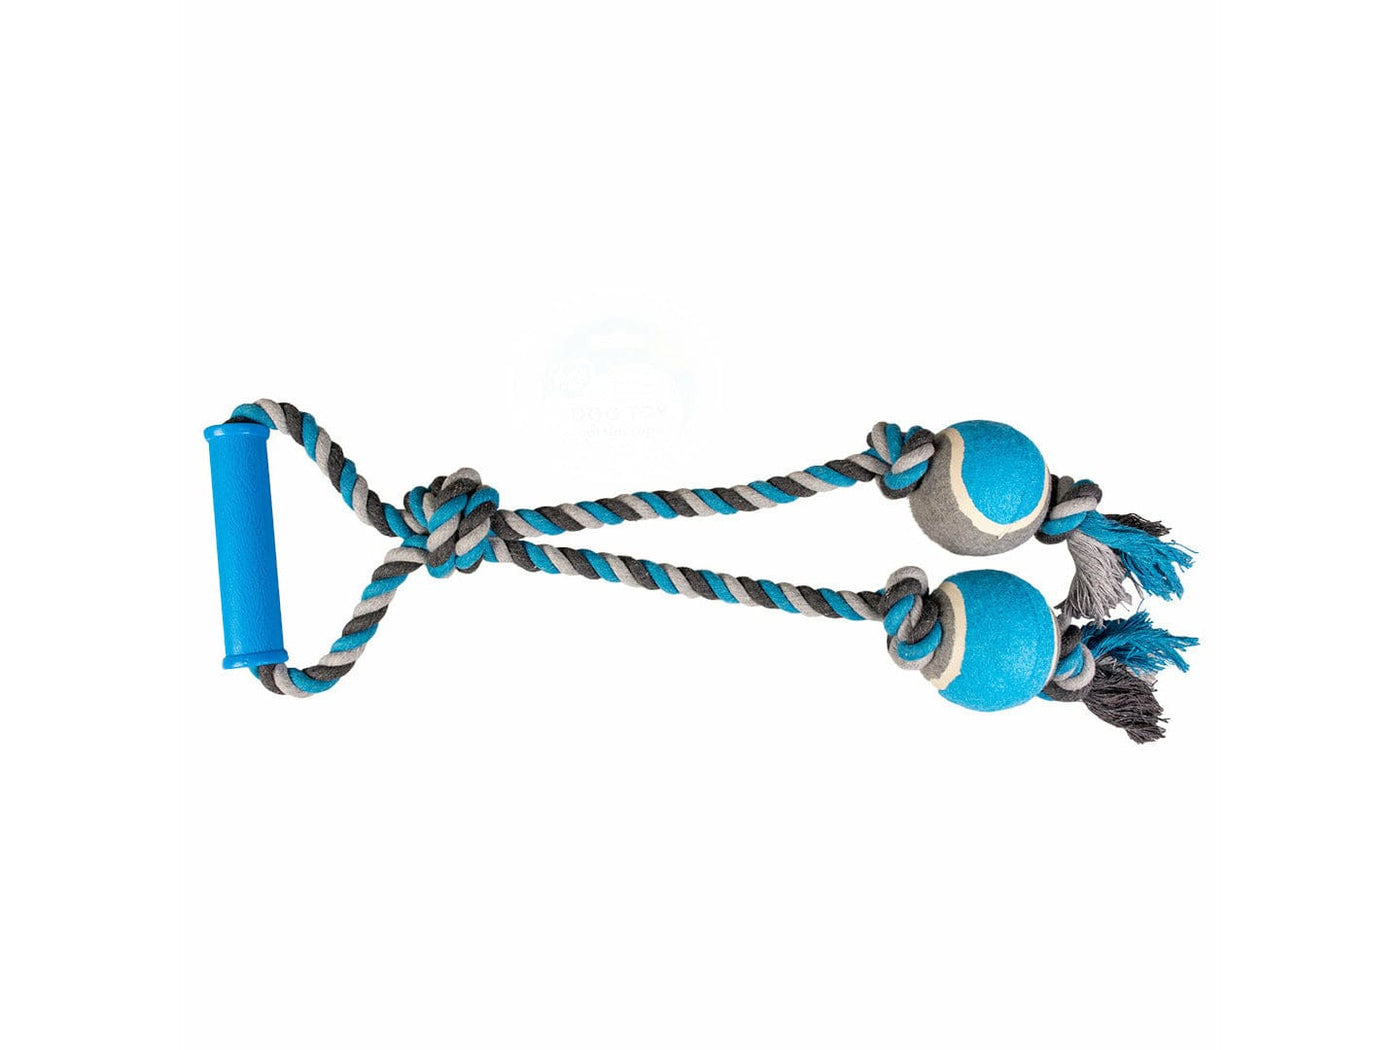 Tug Toy Knotted Cotton Loop & 2 Tennis Balls 43cm grey/blue